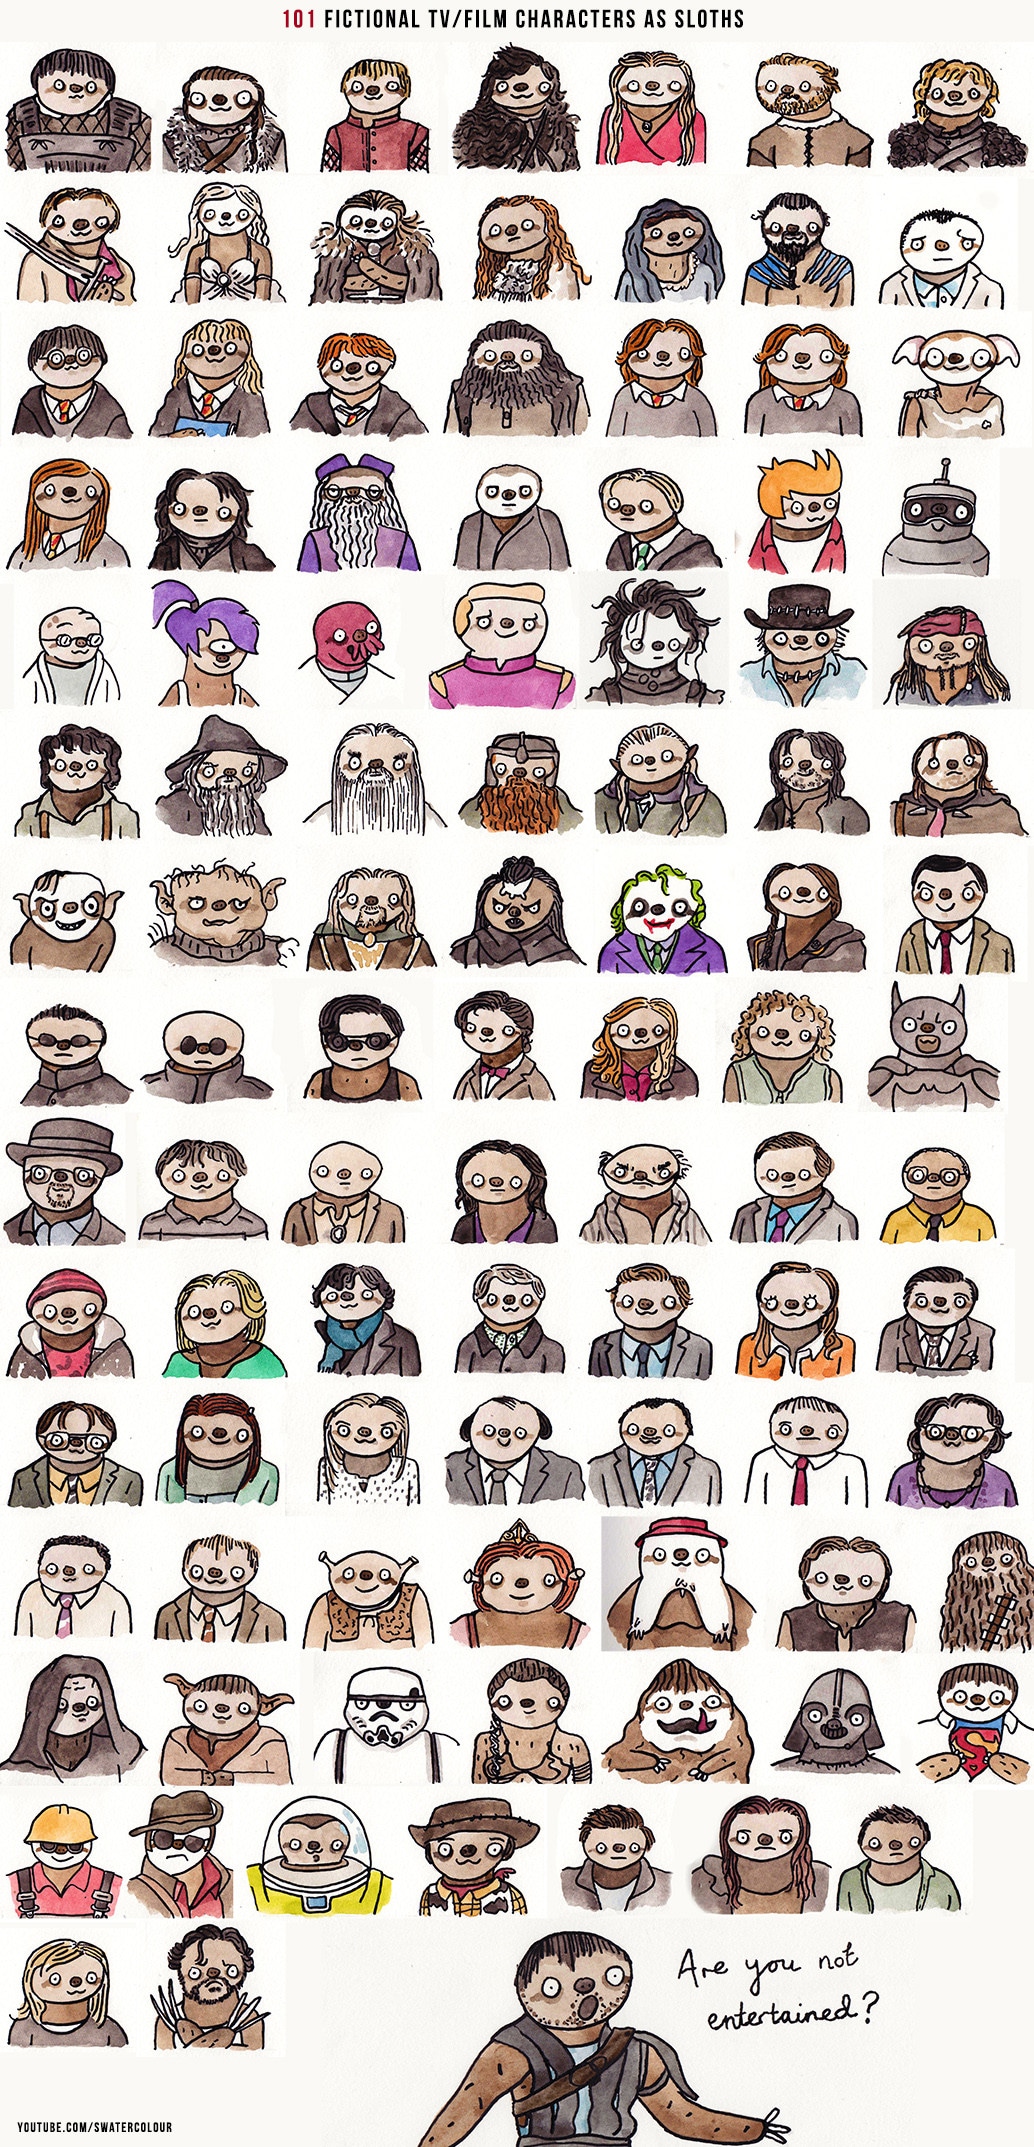 101 Geeky Movie And TV Characters Hand Painted As Mini Sloths [Chart]